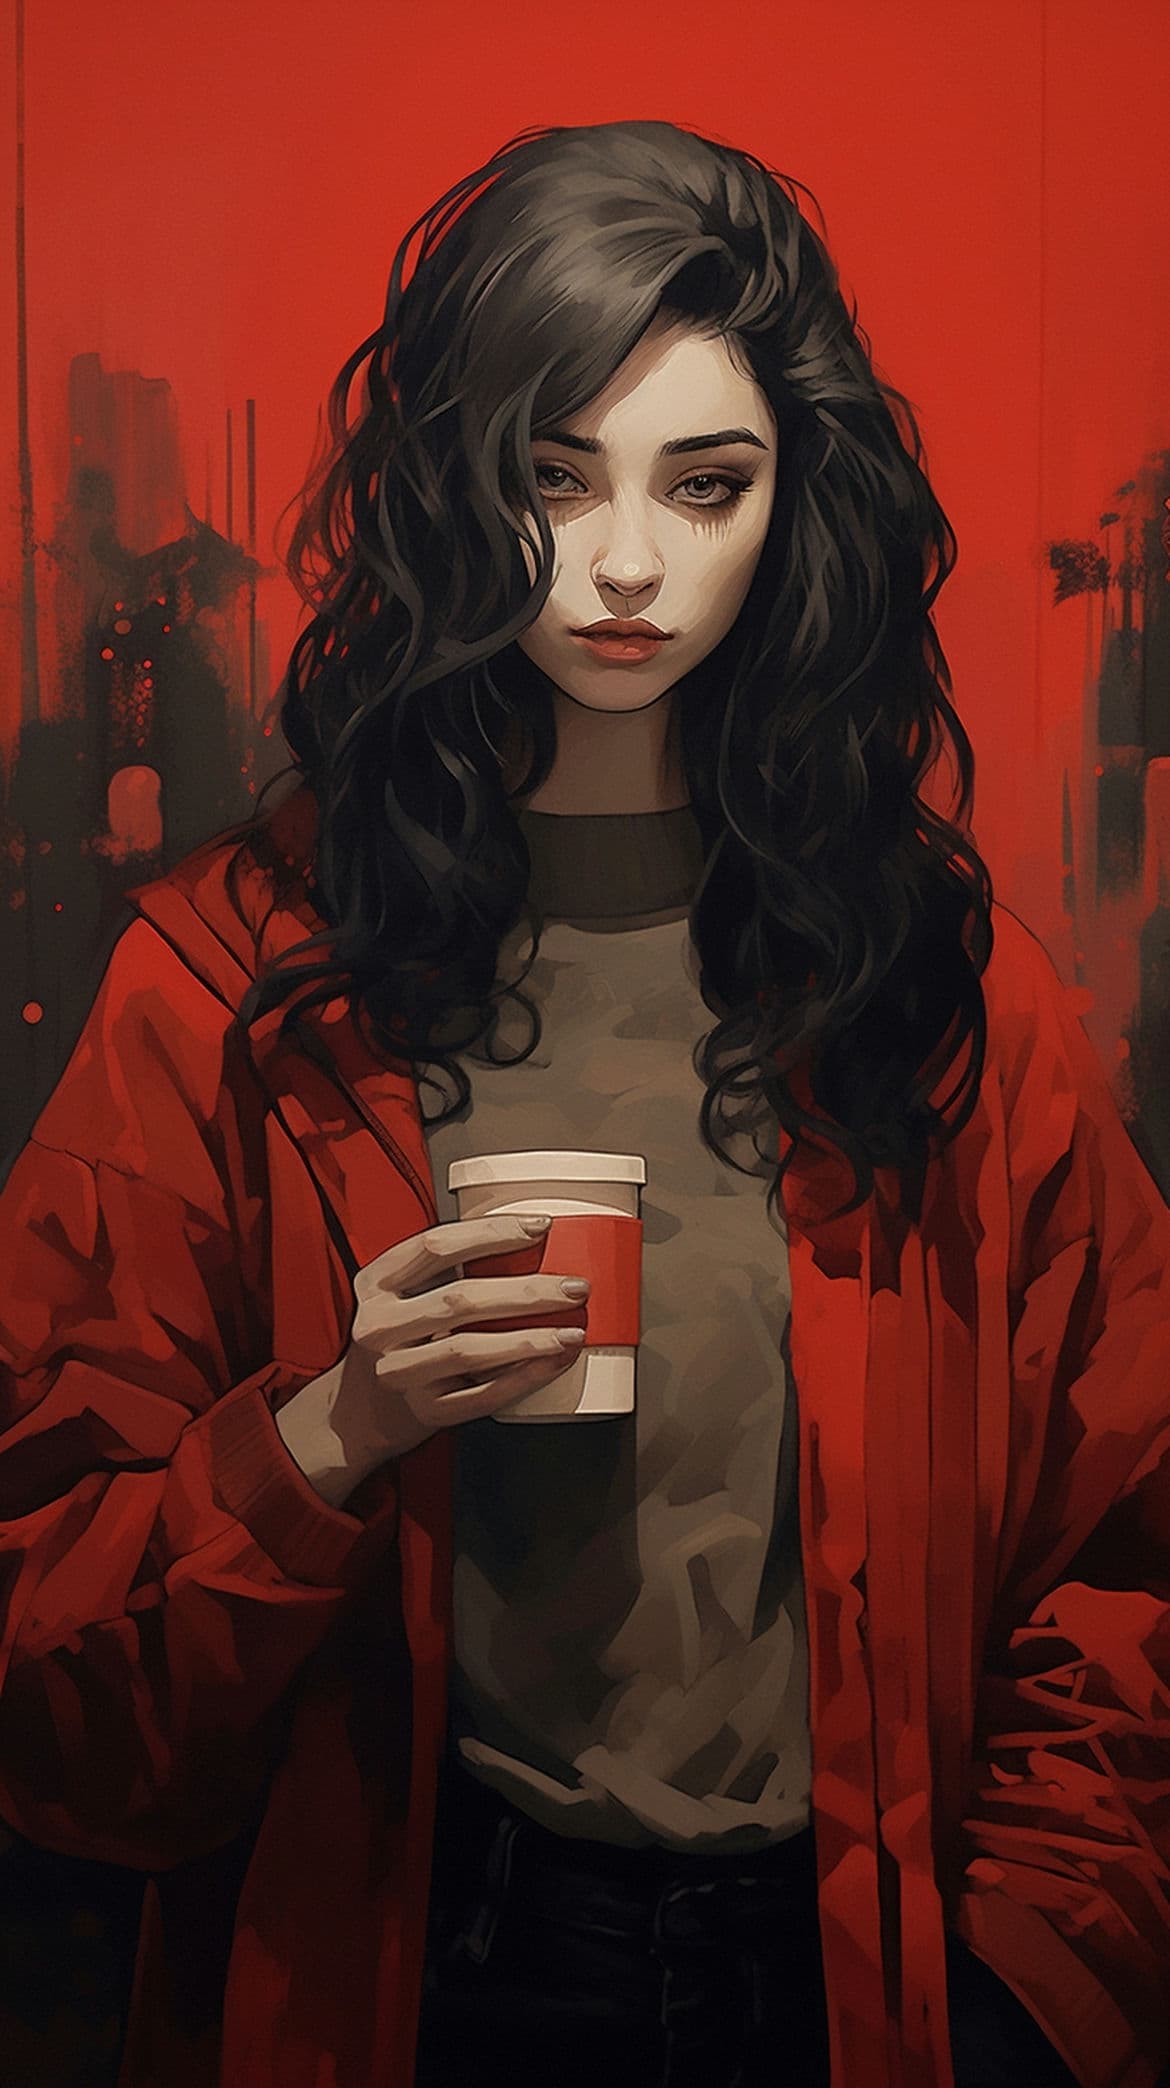 Black haired girl with a cup of coffee in her hands - Anime girl